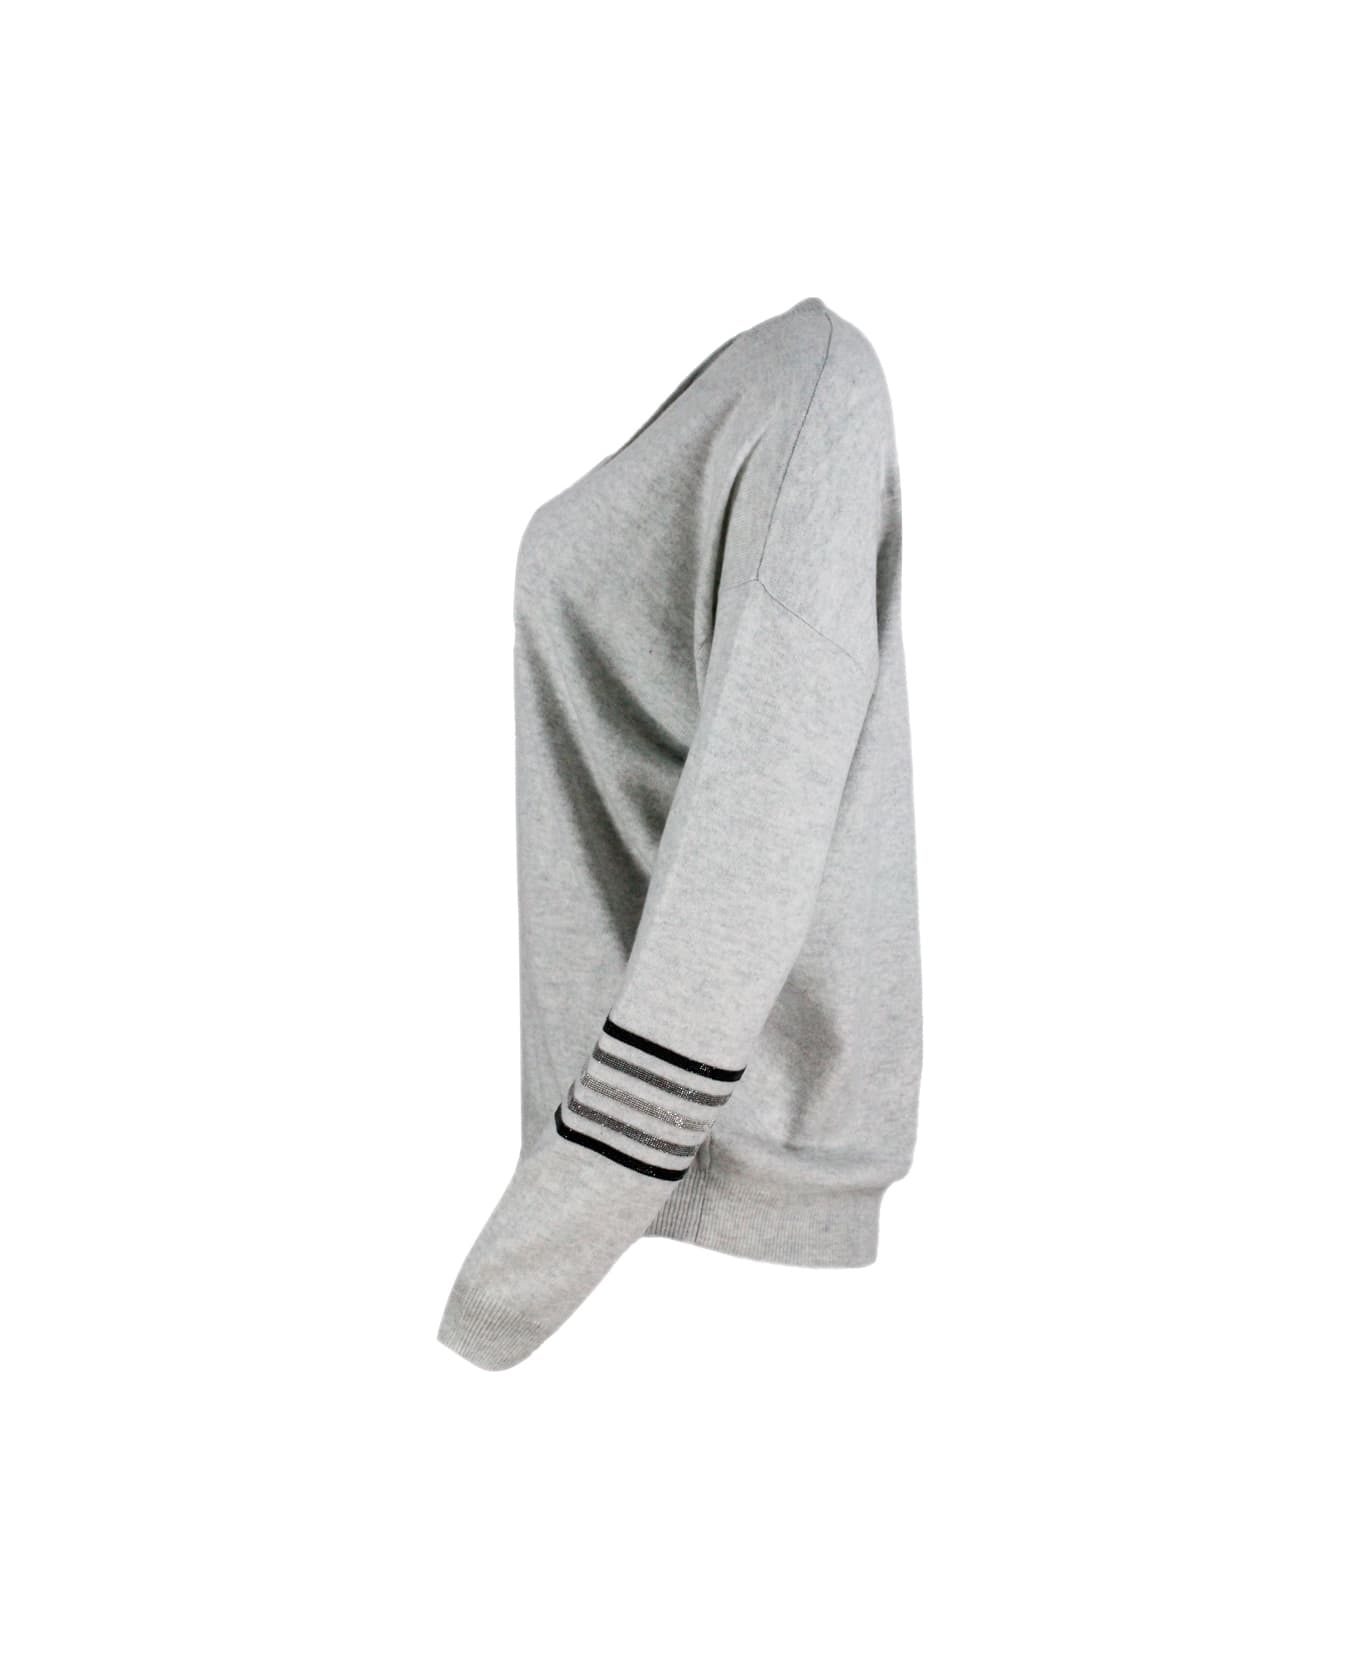 Brunello Cucinelli Cashmere V-neck Sweater With Rows Of Jewels On The Arm - Grey ニットウェア